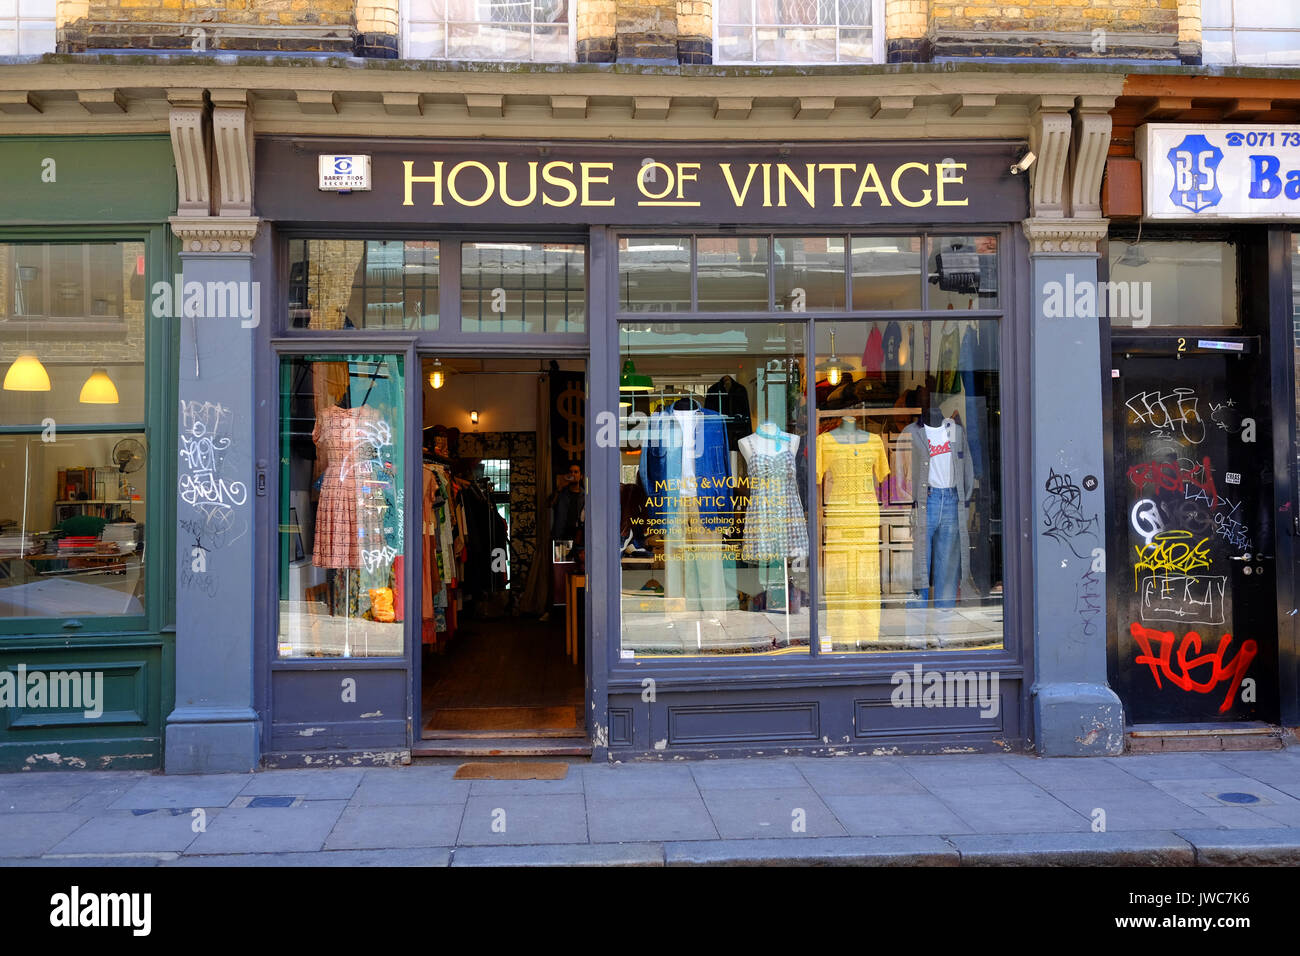 The House of Vintage clothing shop in Cheshire St, London E2 Stock Photo